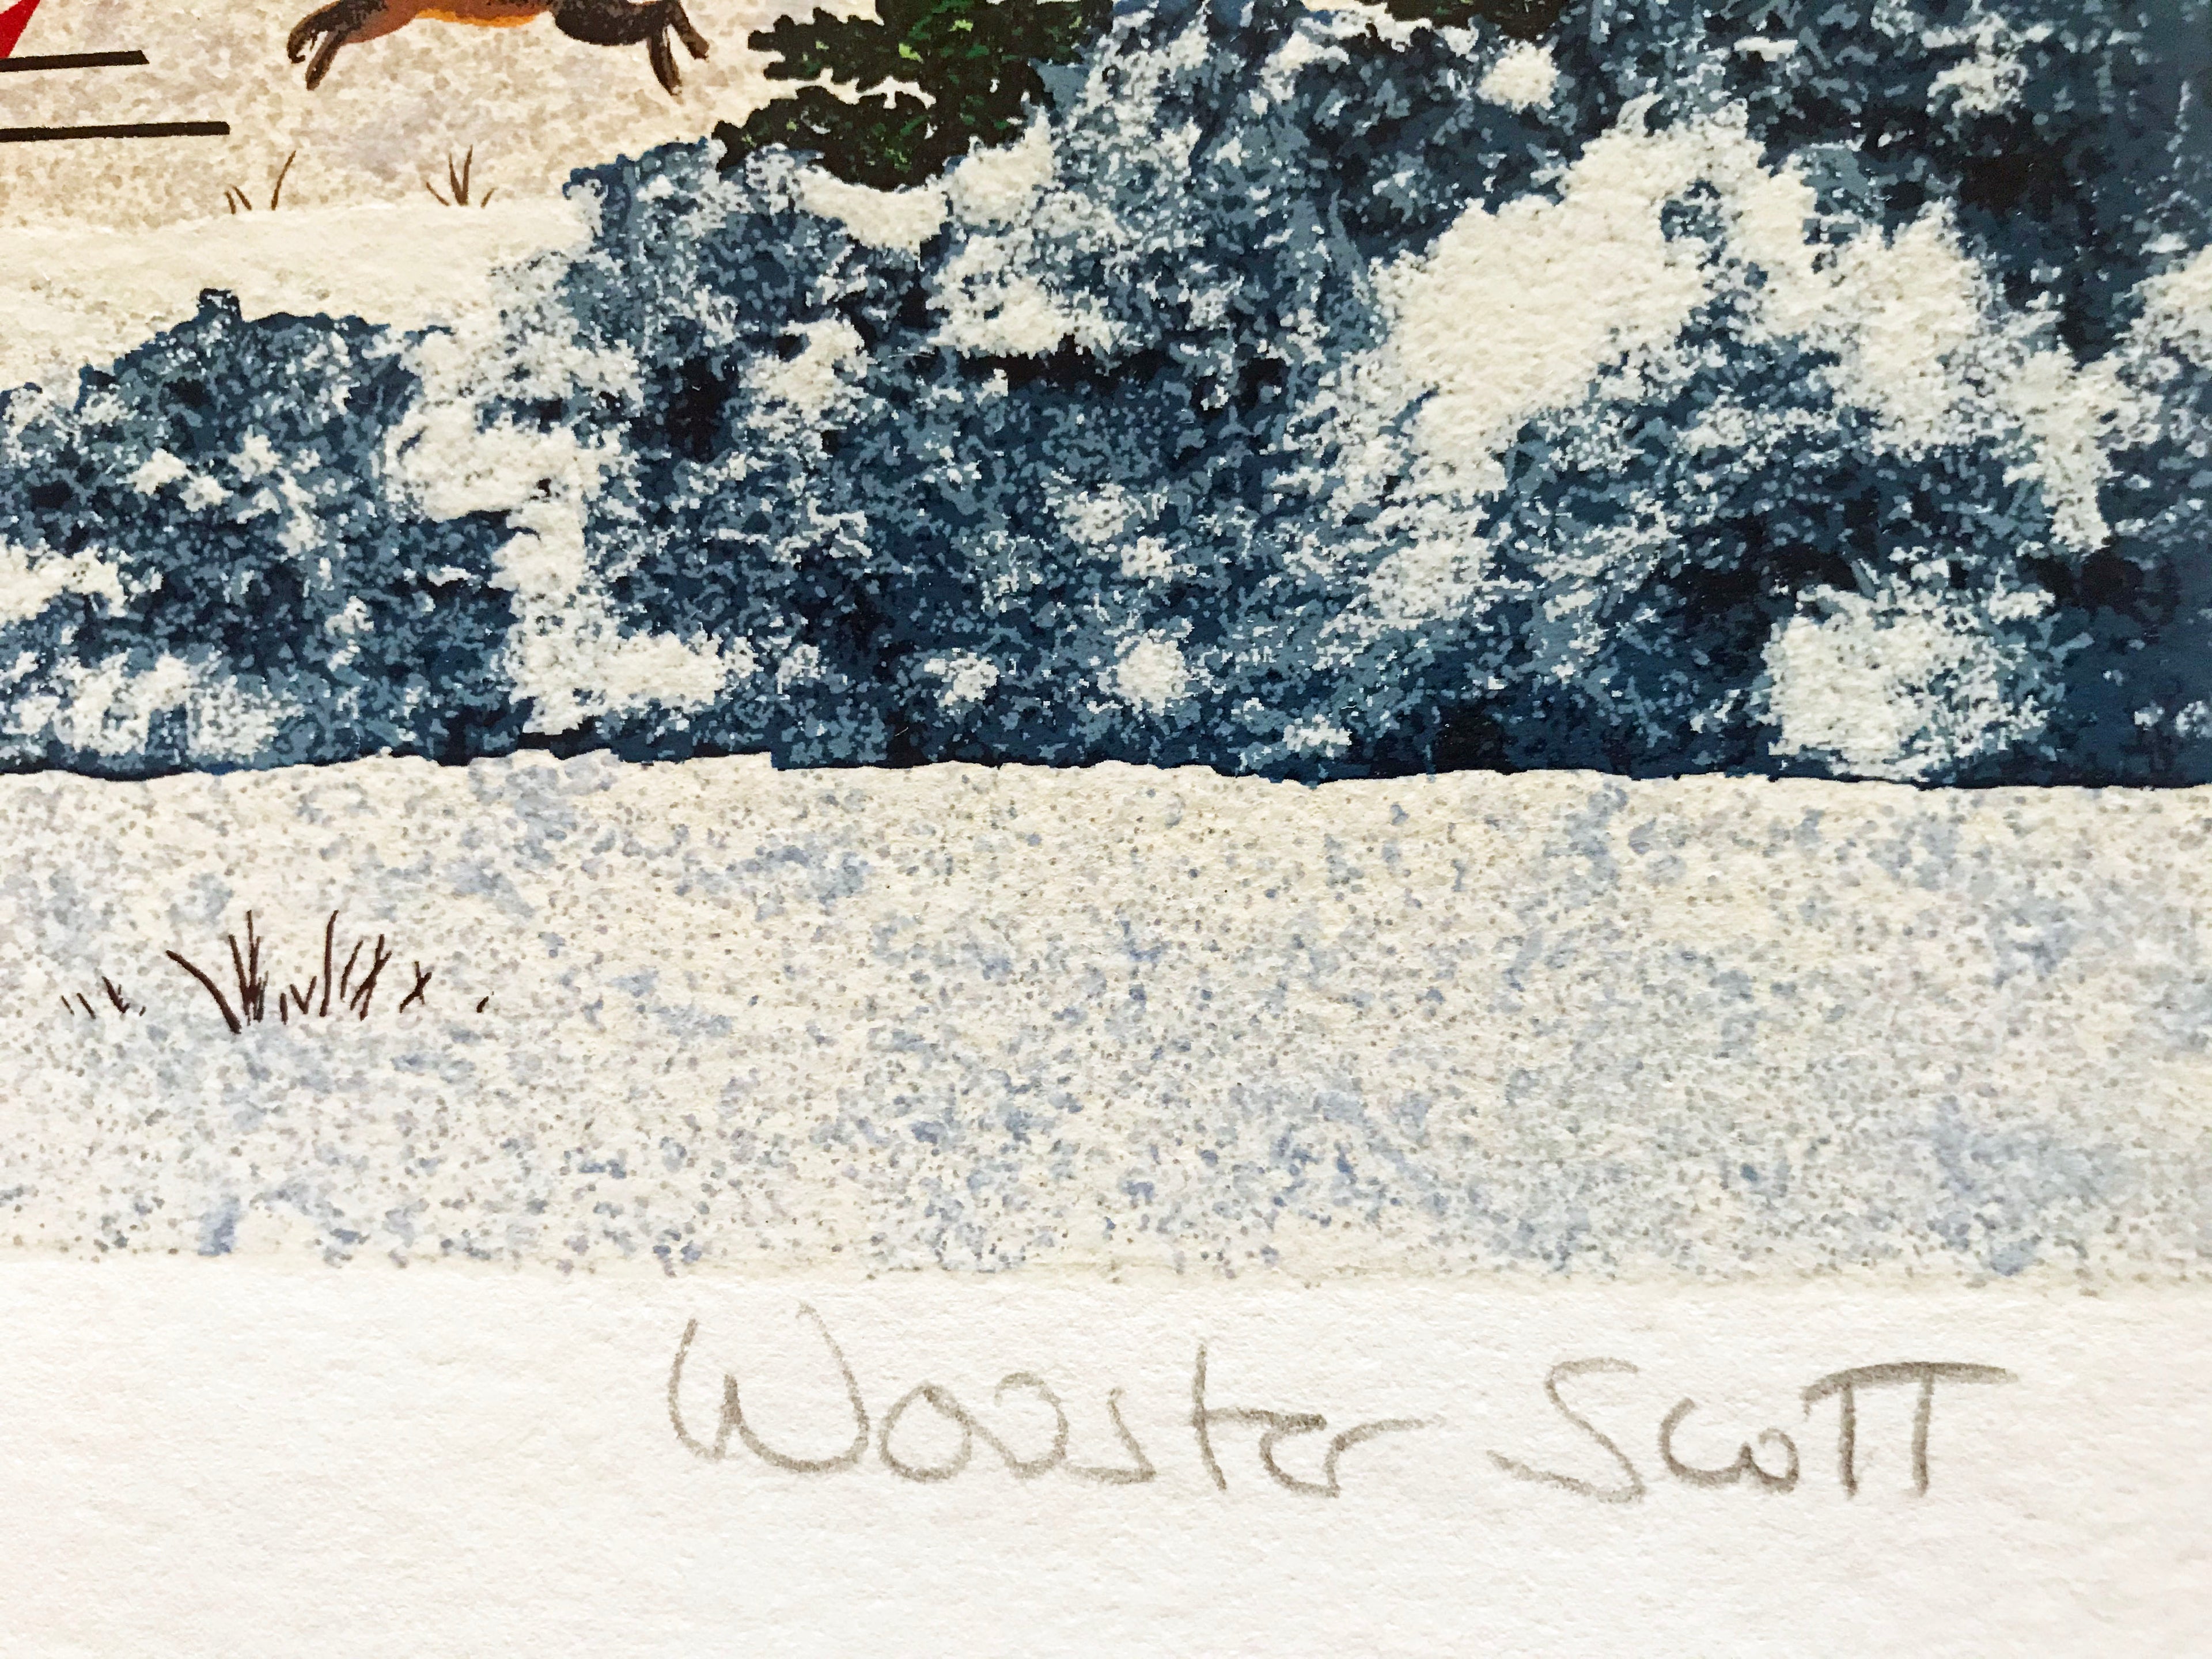 Holiday Sleigh Ride Jane Wooster Scott Serigraph Print Artist Hand Signed and Numbered